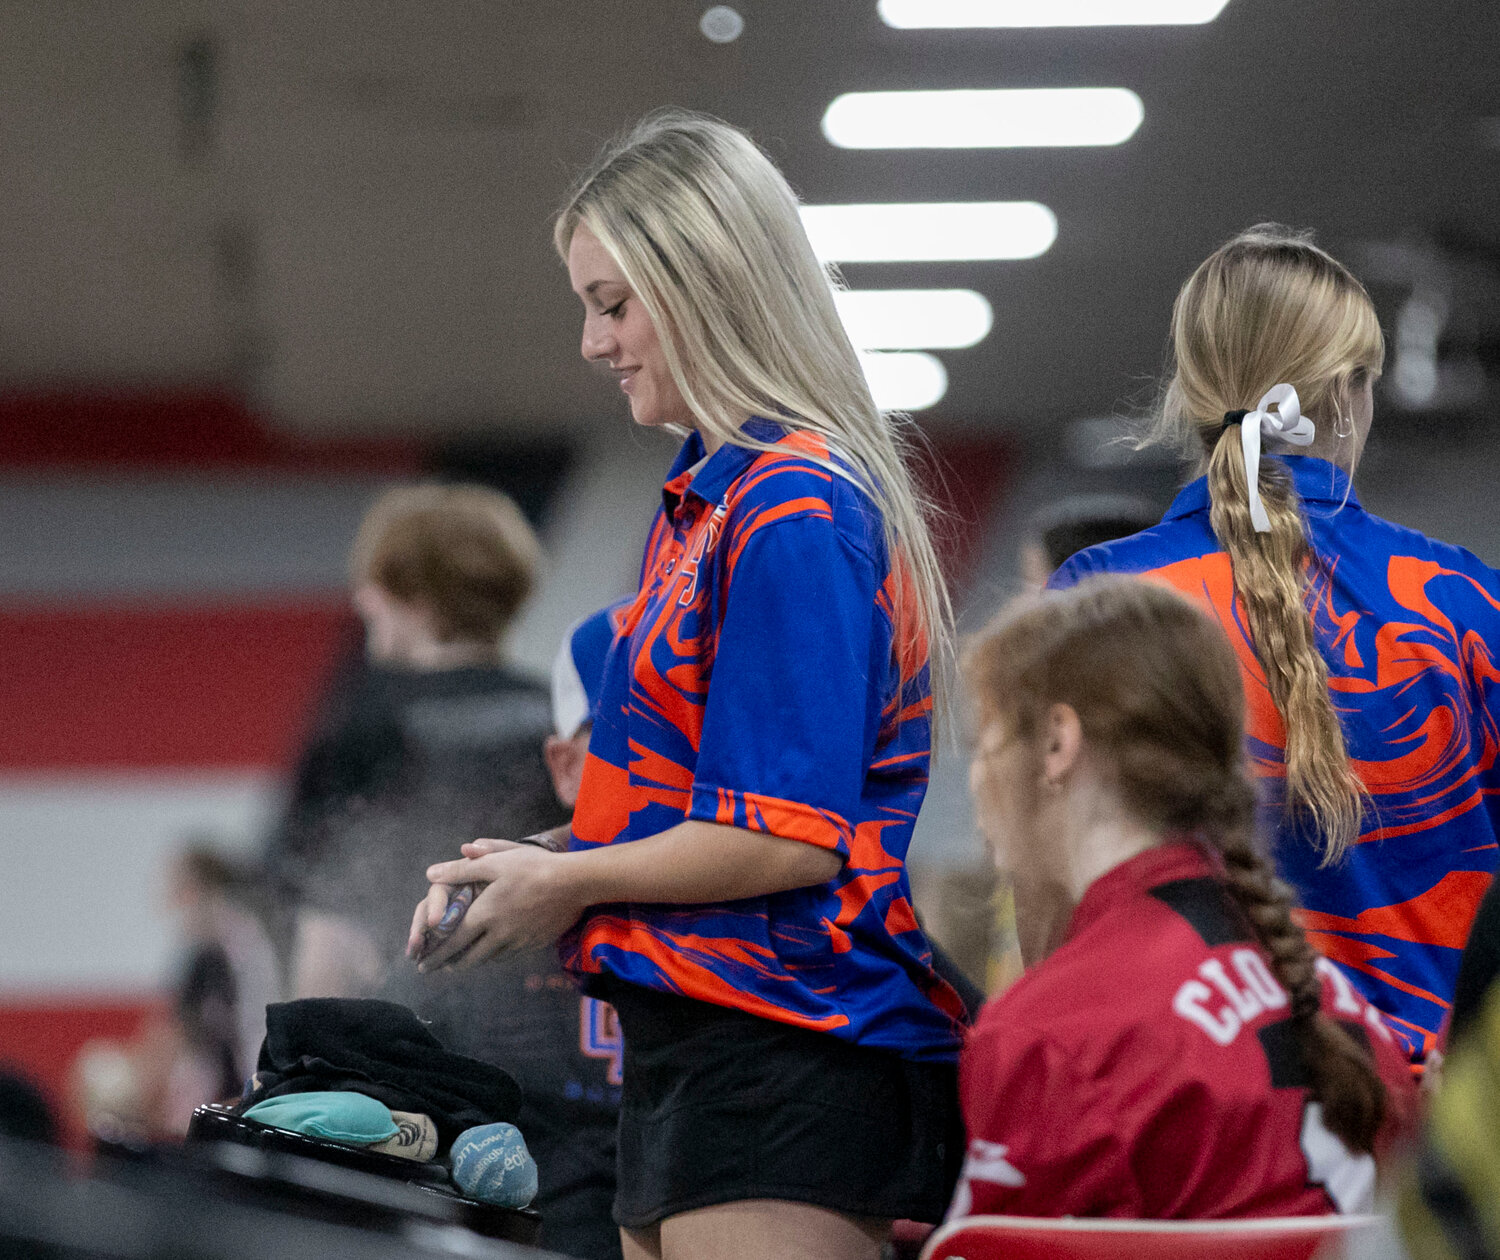 Addy Oldham prepares for her turn at Thursday’s traditional round of play in Mobile for the AHSAA state bowling championships. After the dust settled on the seeding, Oldham and the Orange Beach Makos will enter Friday’s state finals as the No. 7 seed in the Class 1A-5A bracket.